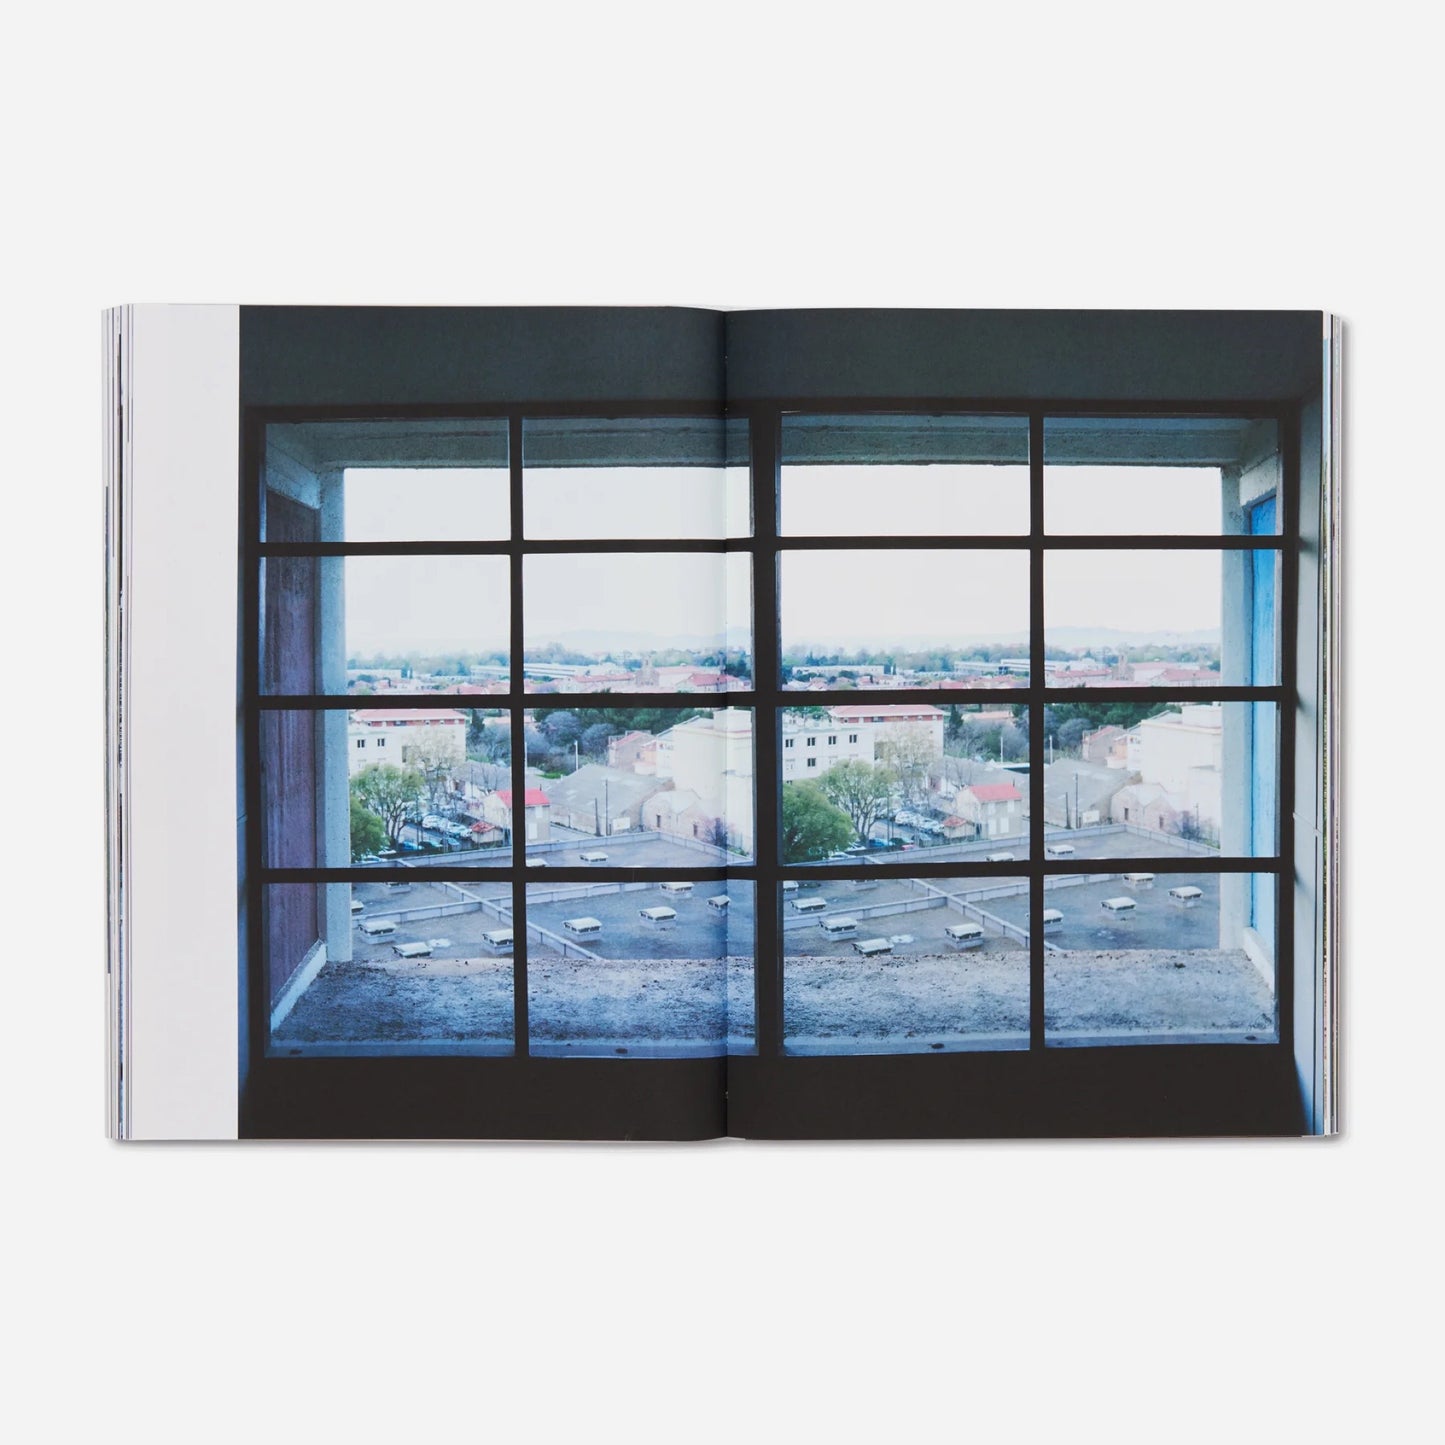 LOOKING THROUGH - LE CORBUSIER WINDOWS by Takashi Homma